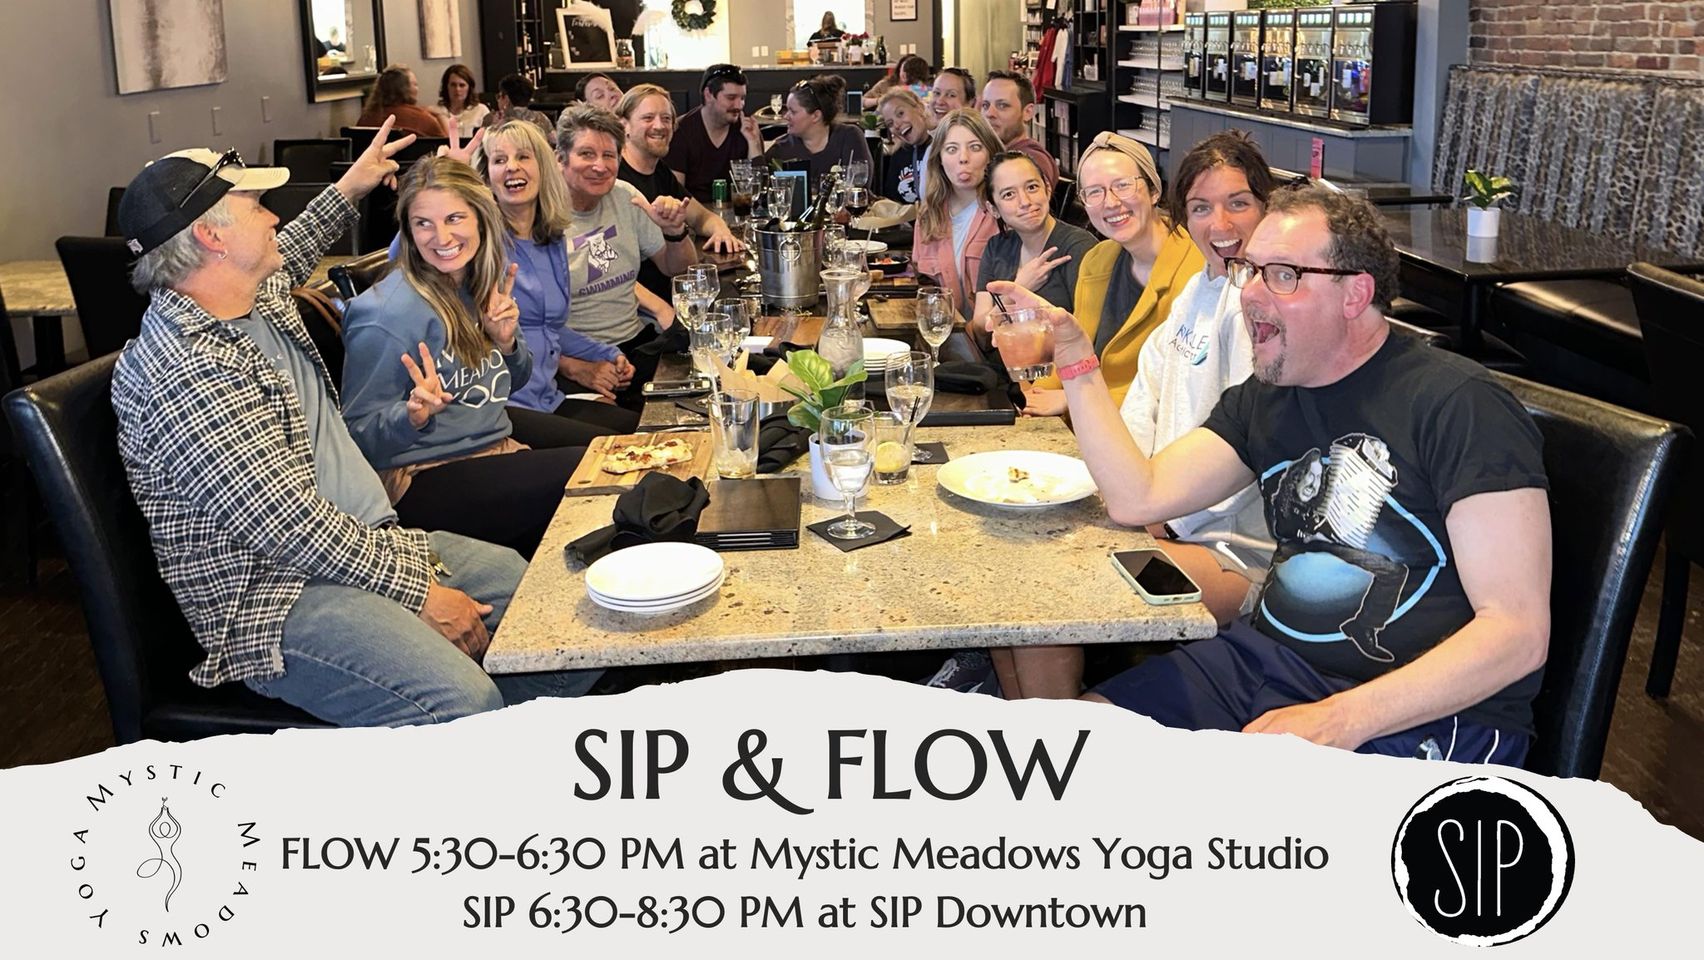 Check more about Sip & Flow